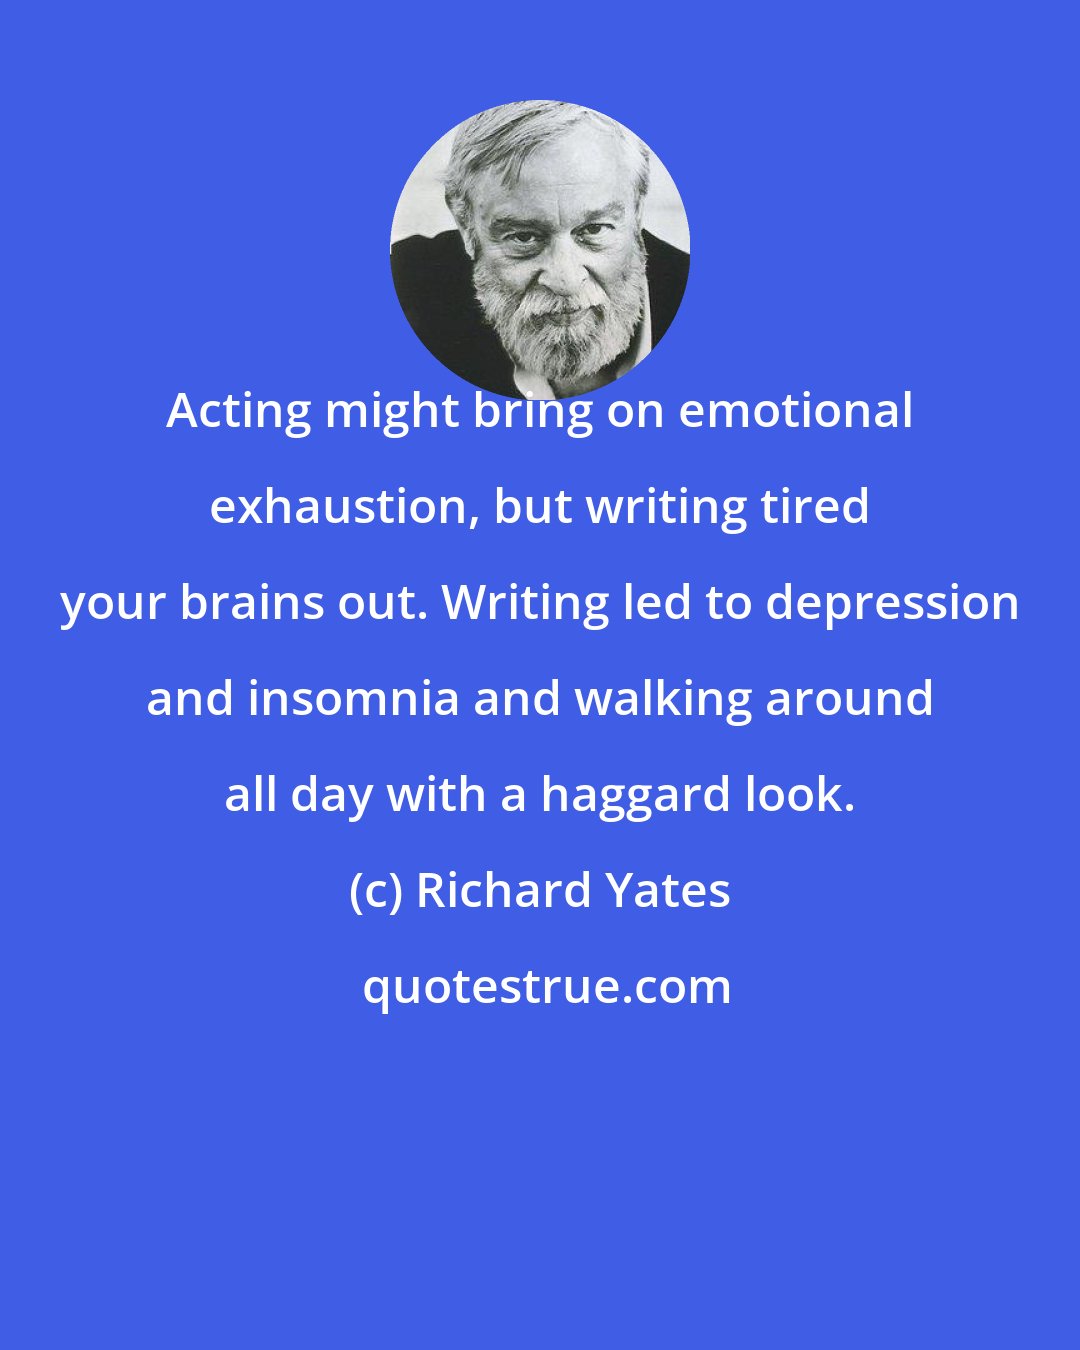 Richard Yates: Acting might bring on emotional exhaustion, but writing tired your brains out. Writing led to depression and insomnia and walking around all day with a haggard look.